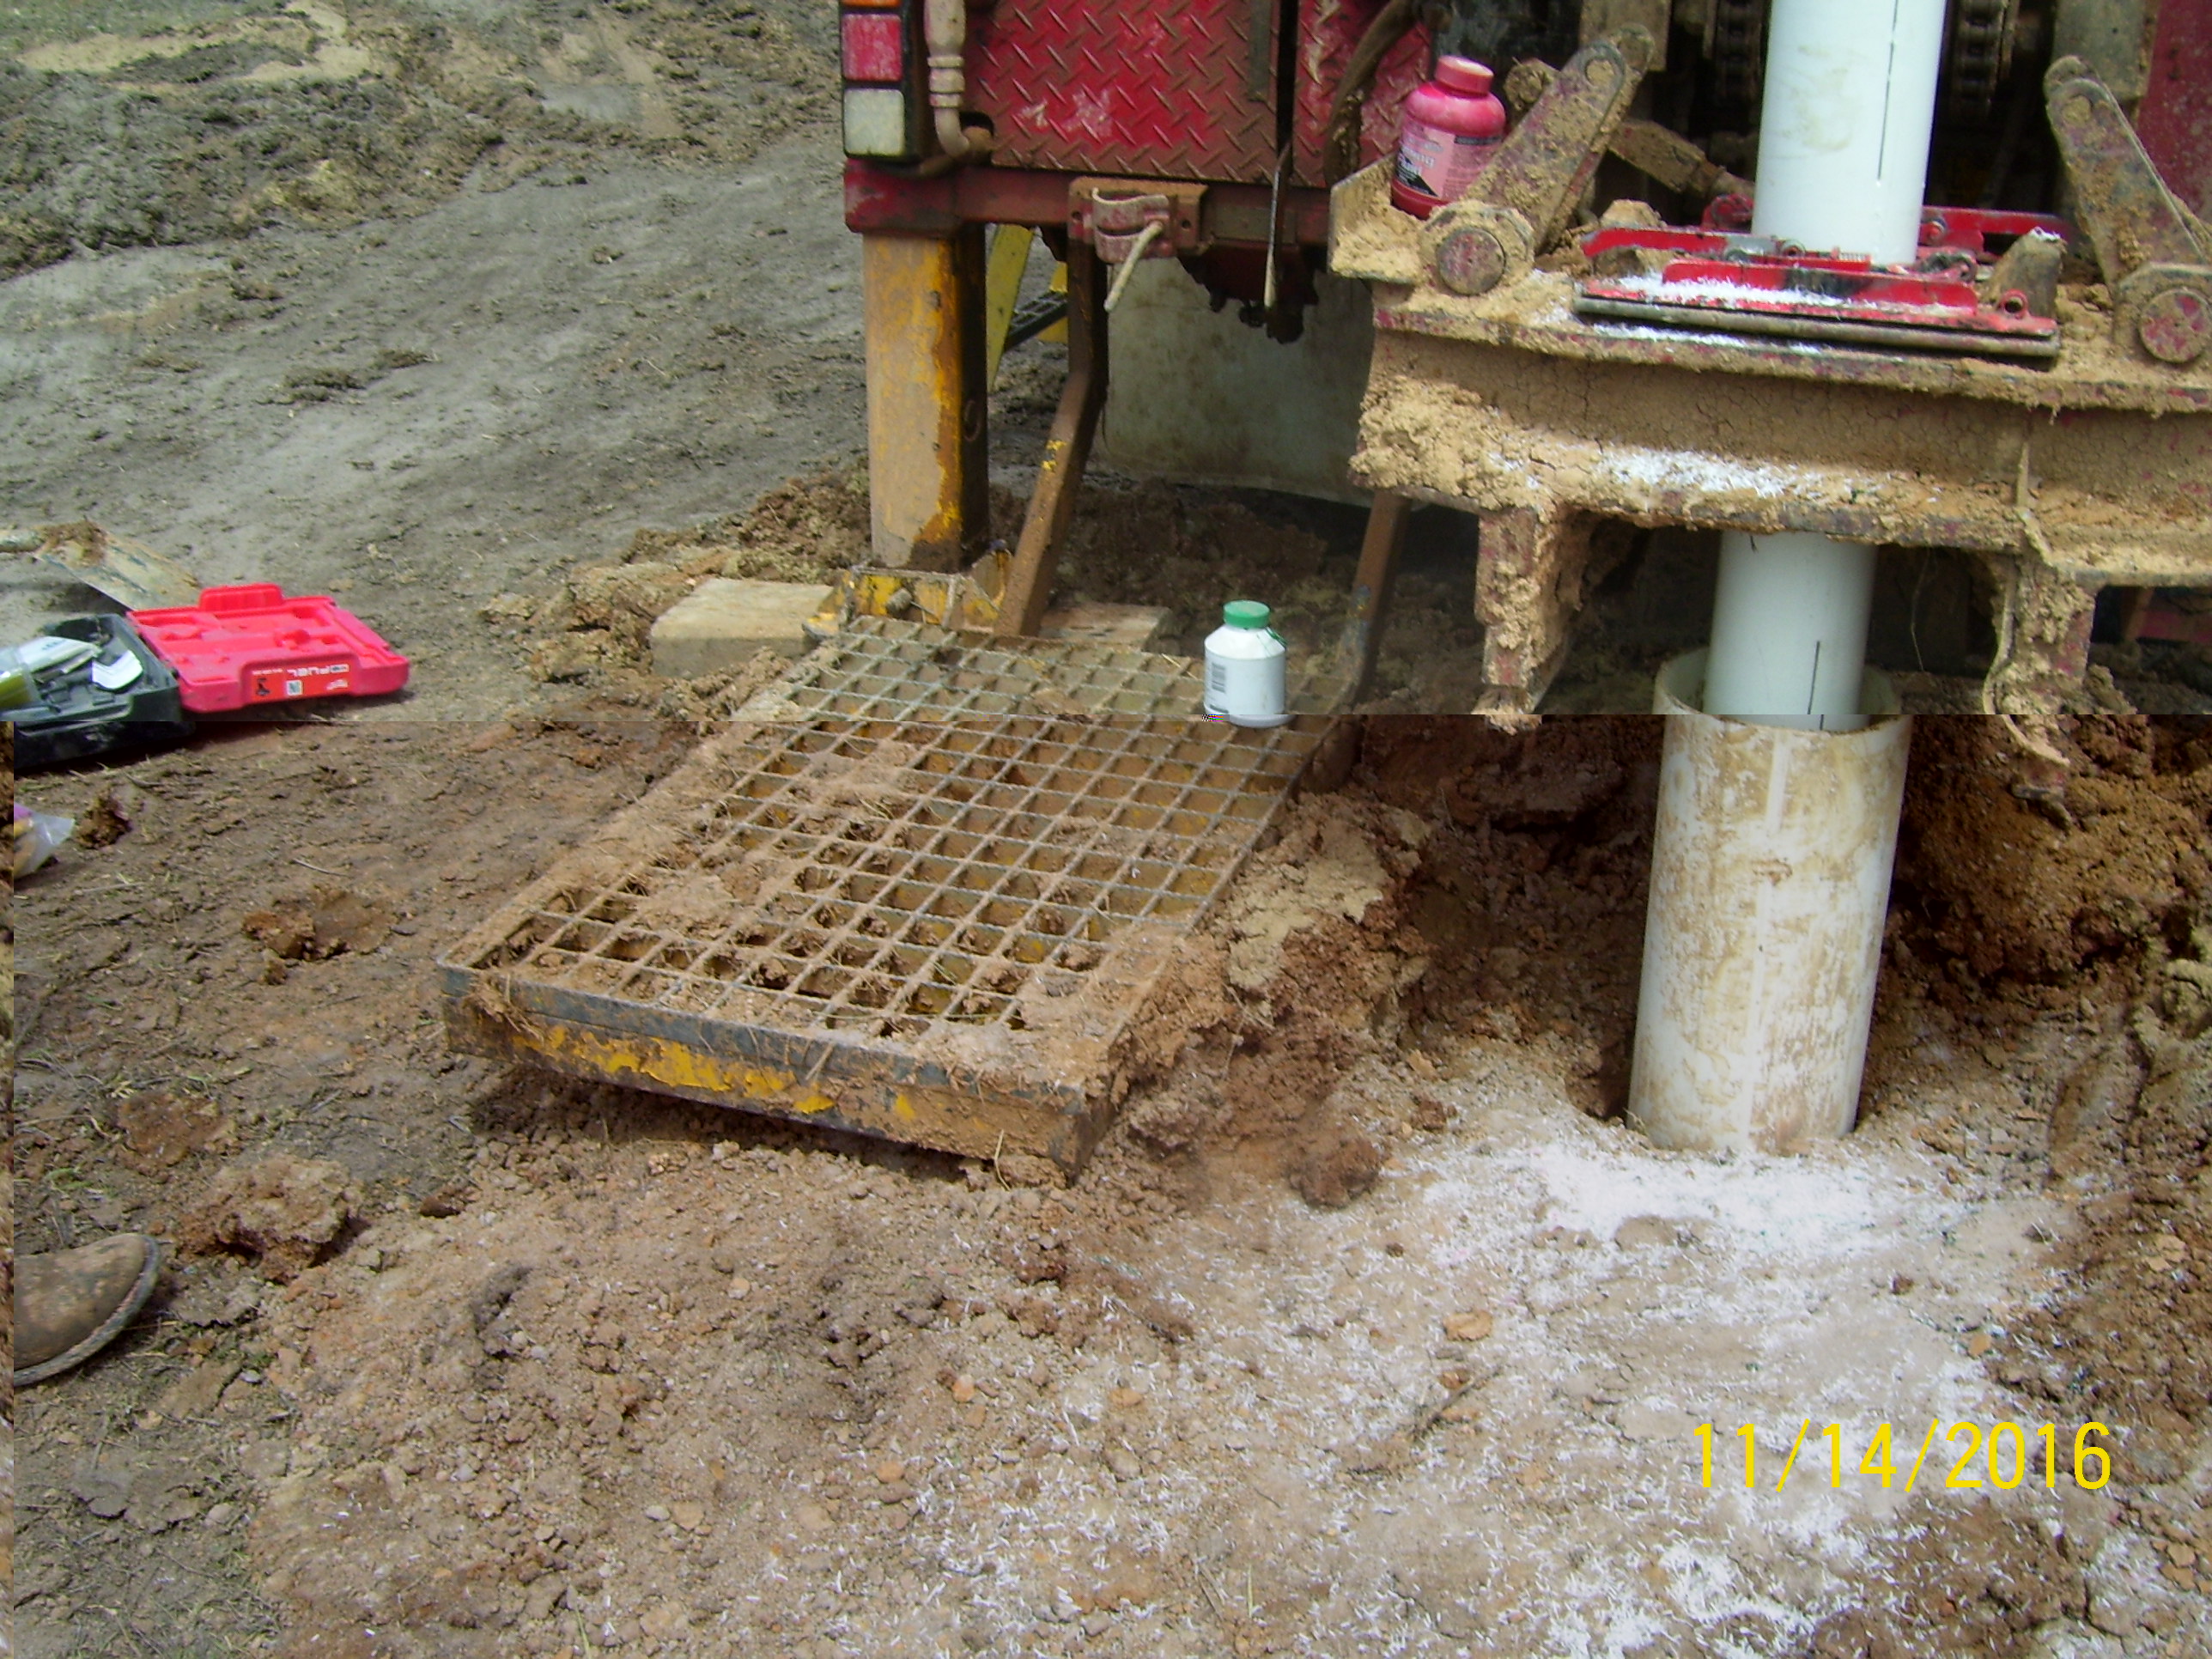 Picture,Image,Putting slotted caseing in bore hole after finding water